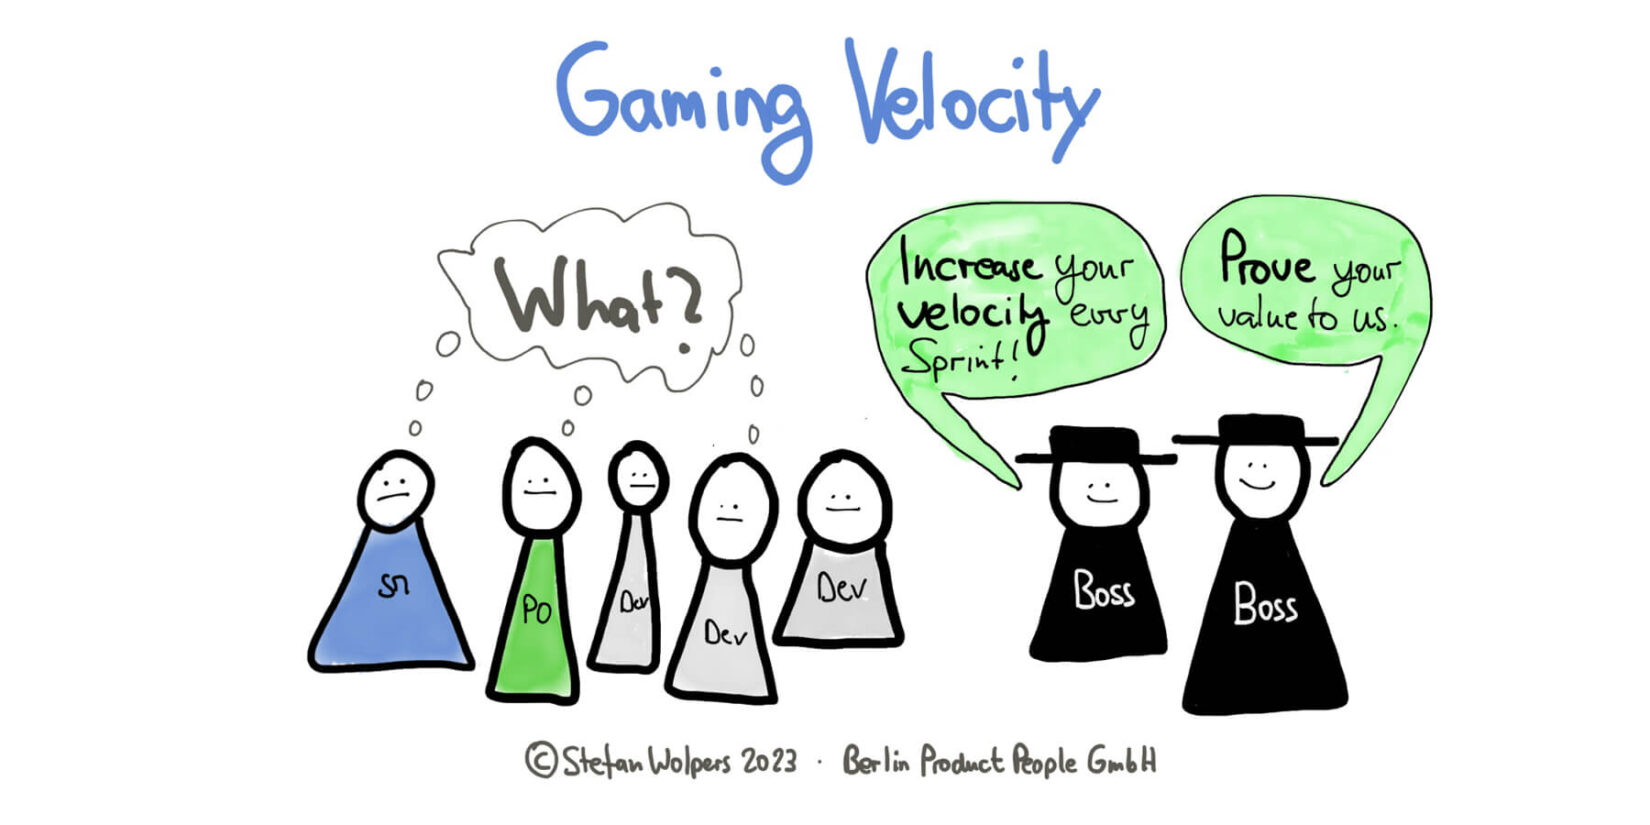 Gaming Velocity – Age-of-Product.com